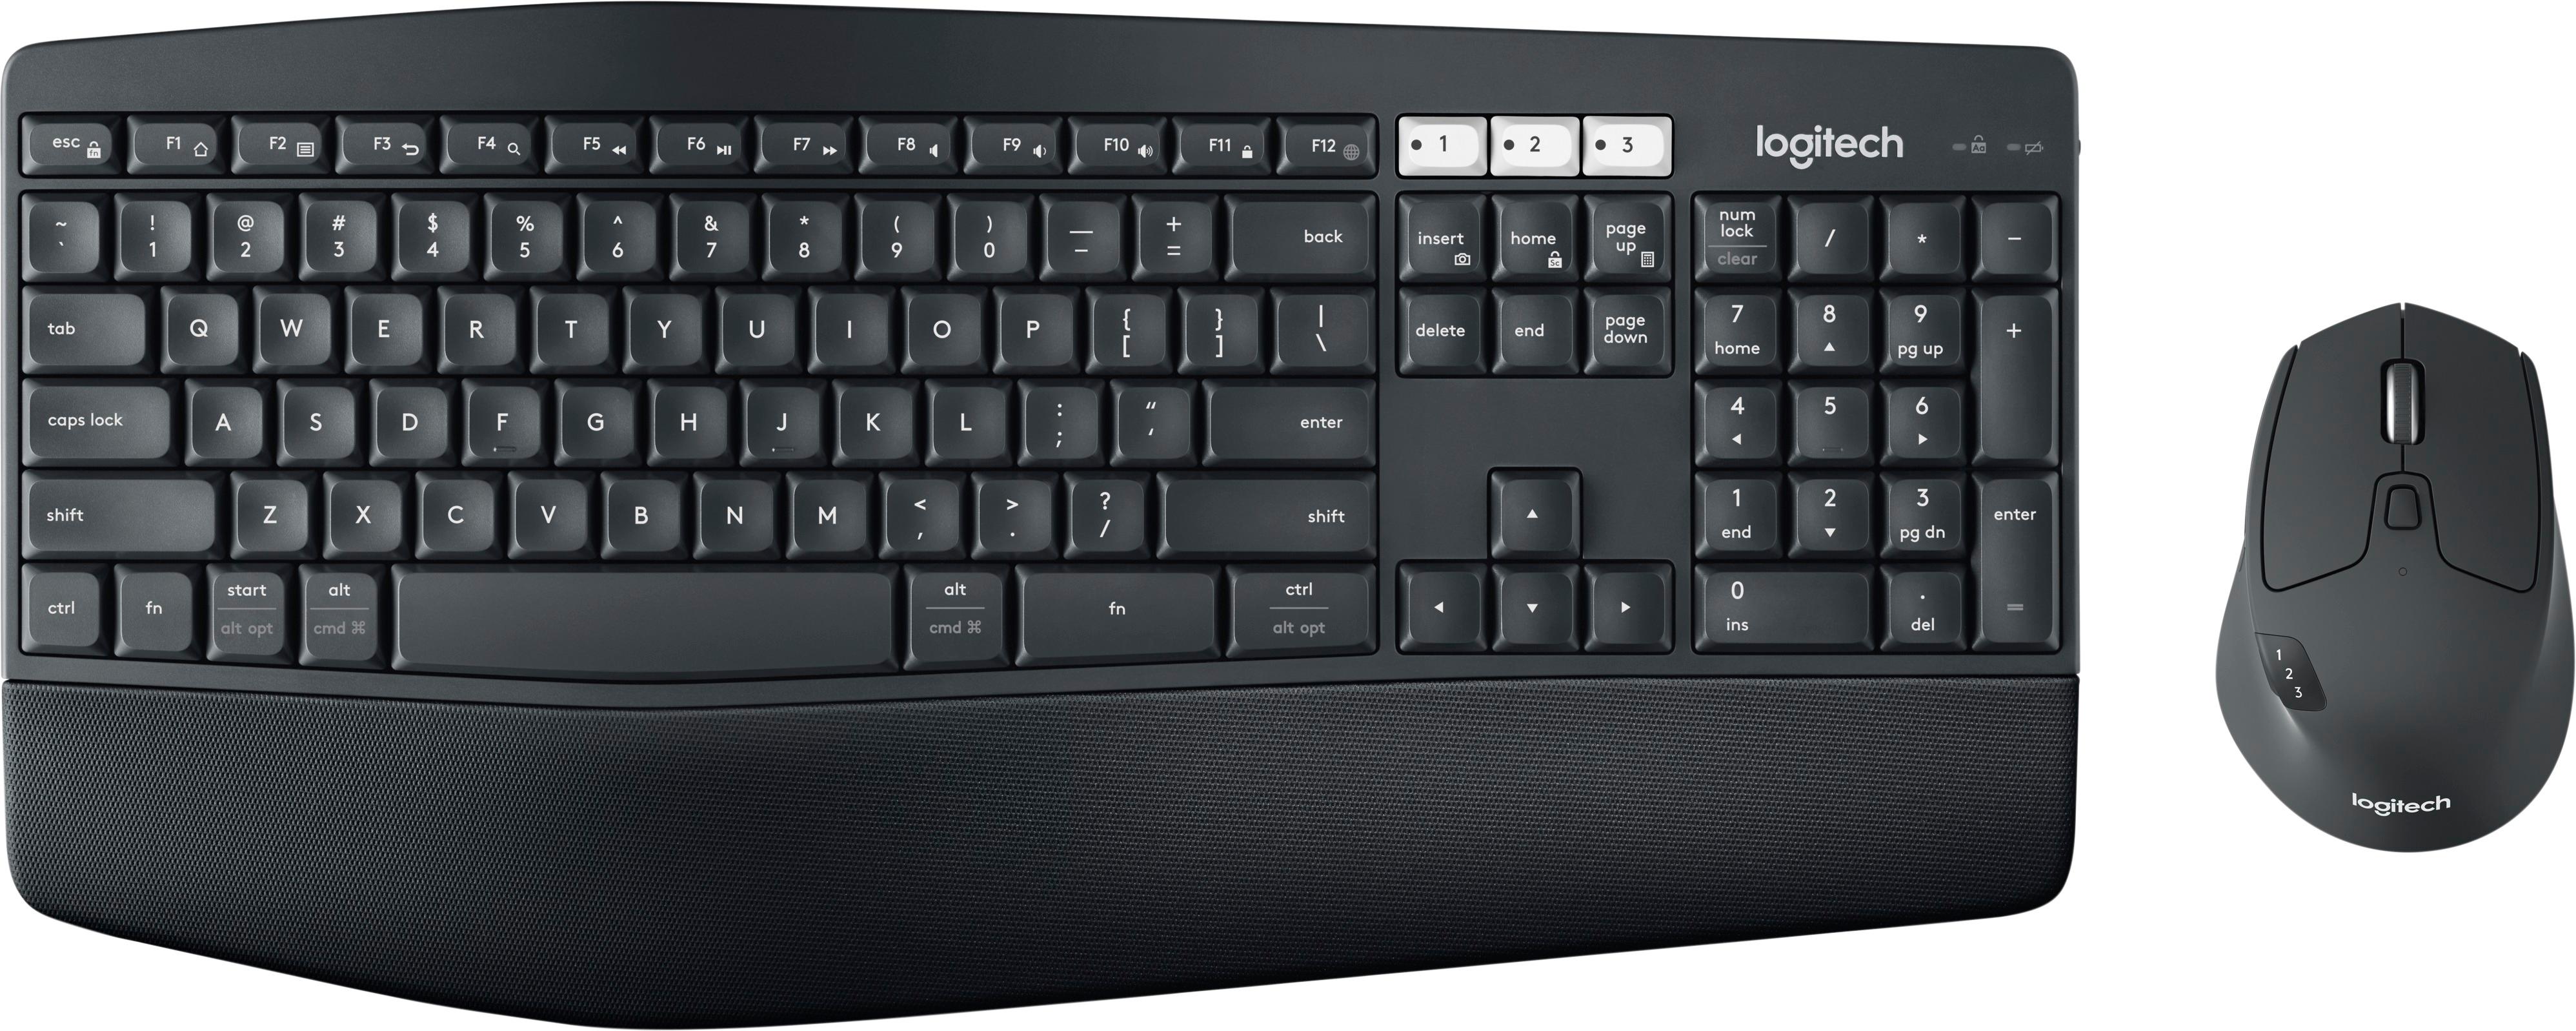 MK850 Performance Full-size Wireless Keyboard Mouse Combo for PC and Mac 920-008219 - Best Buy